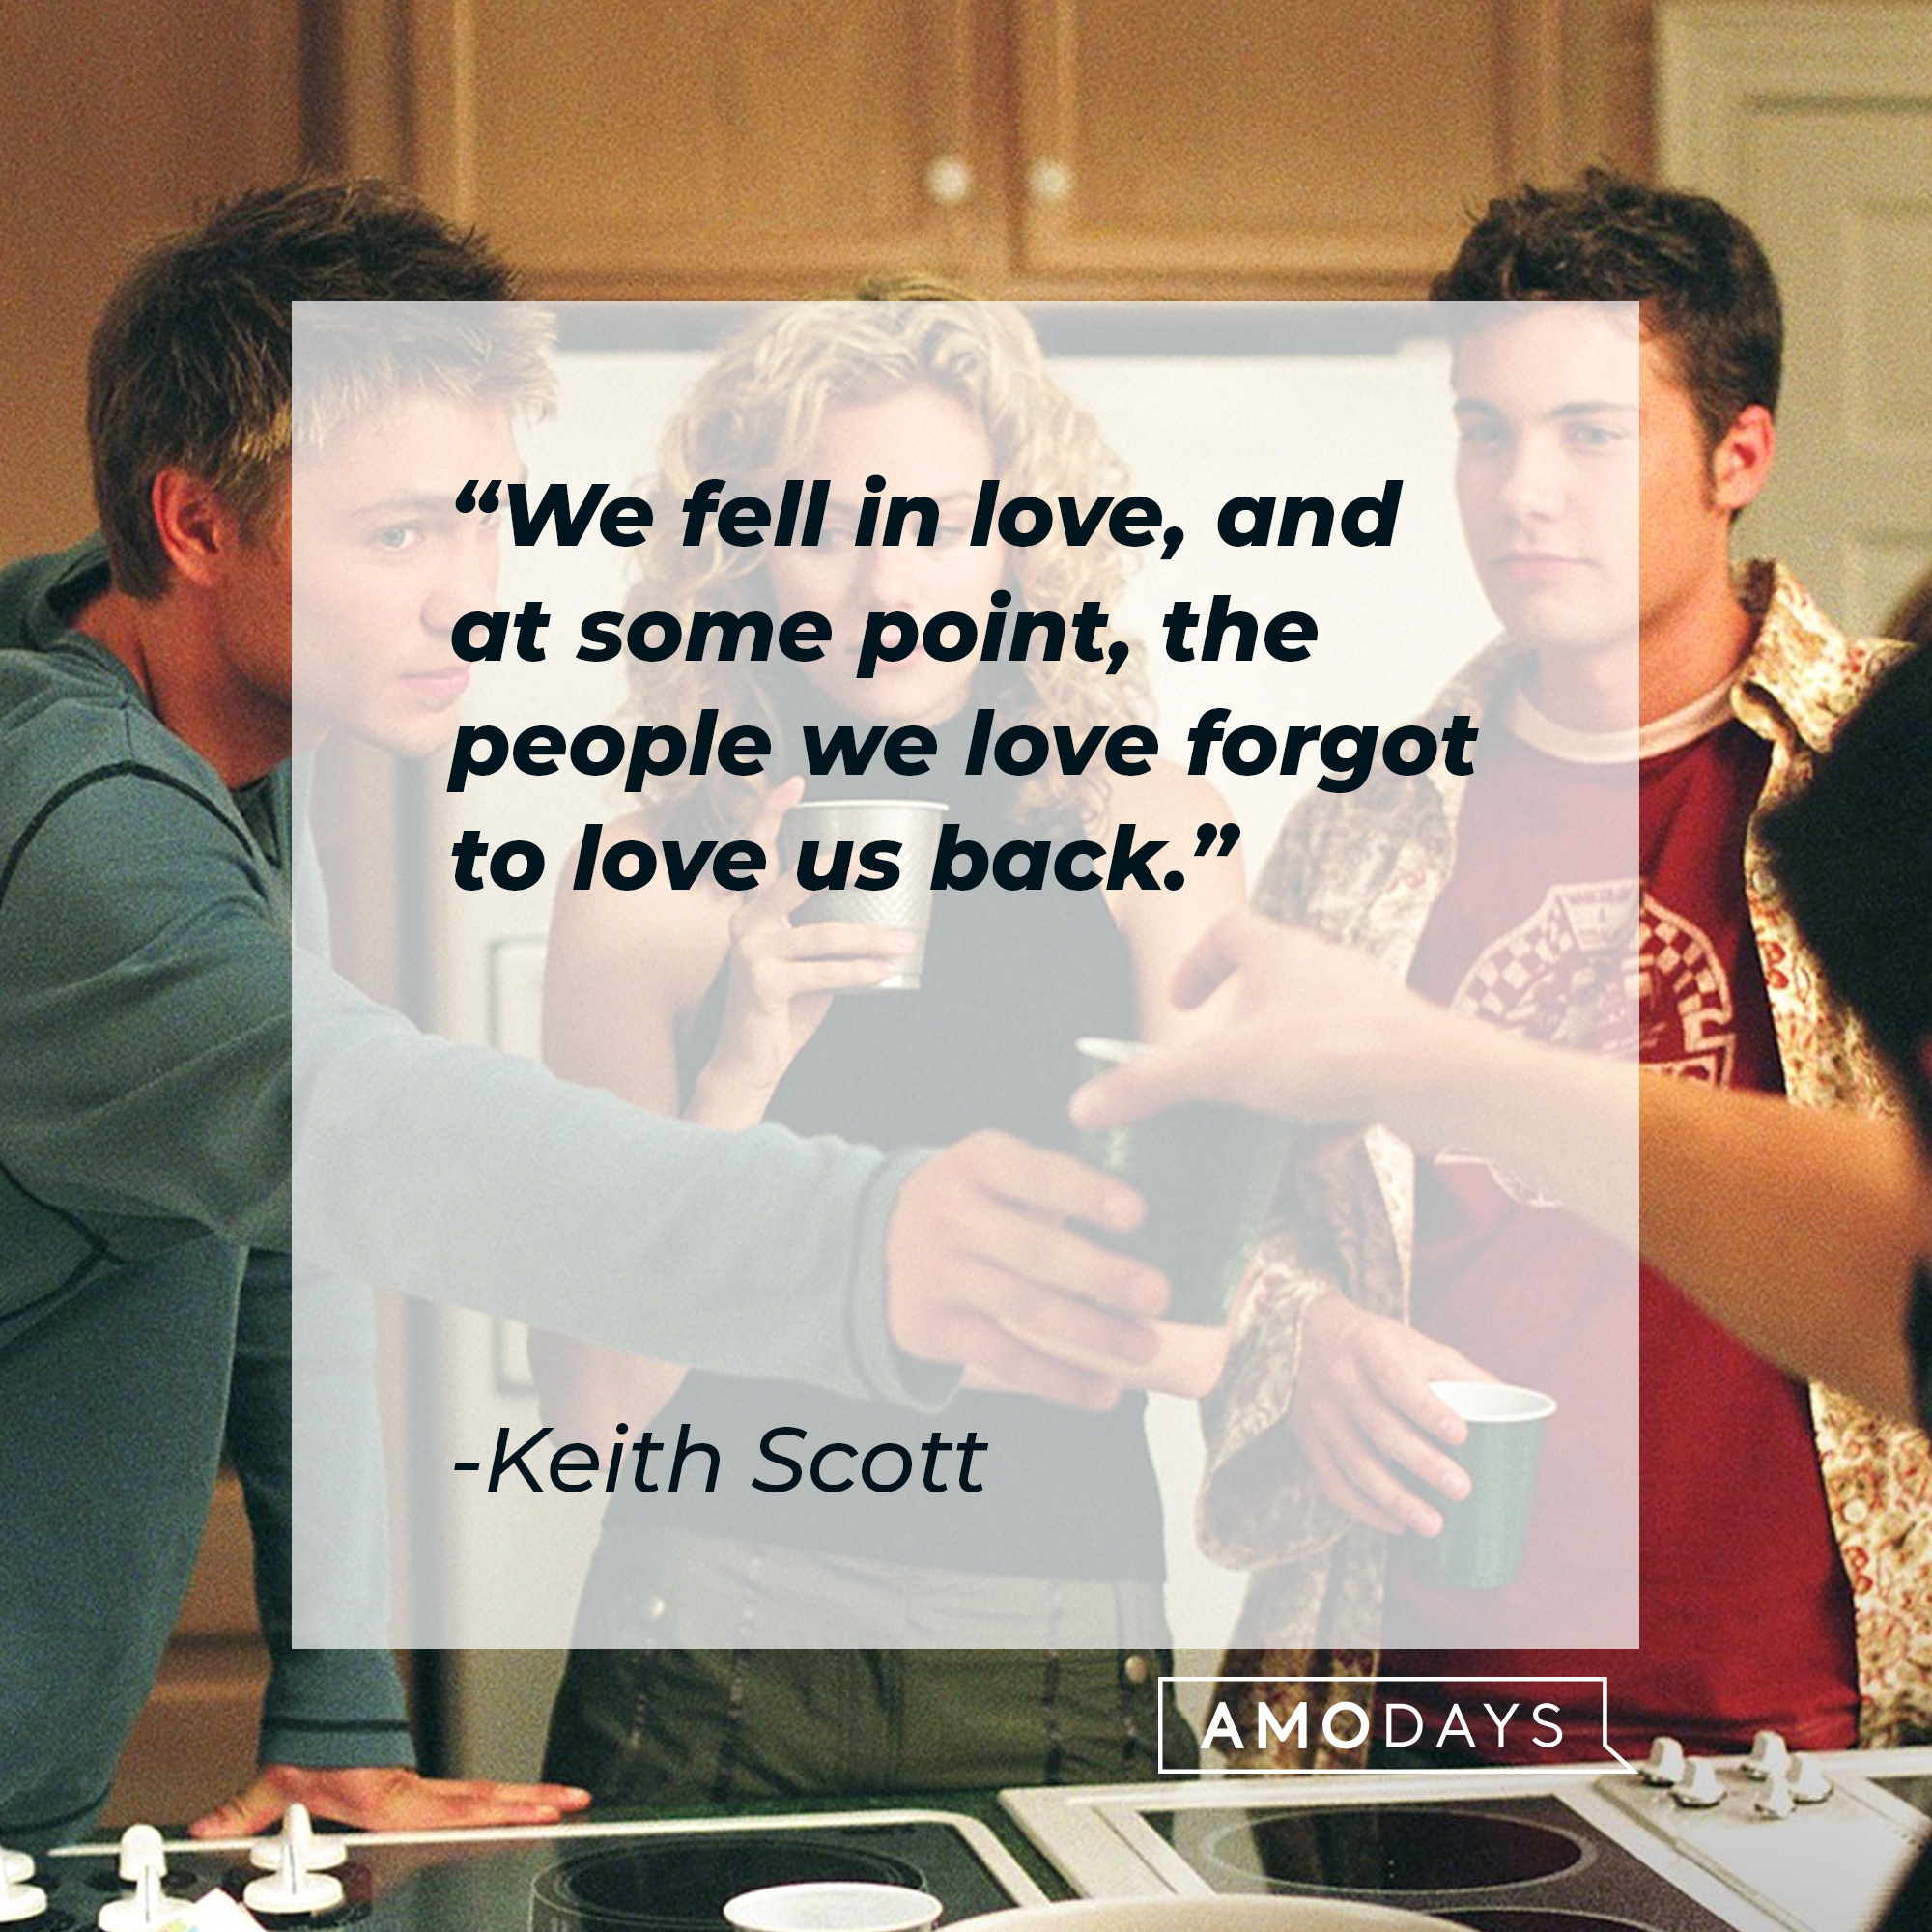 A photo from "One Tree Hill" with Keith Scott's quote, "We fell in love, and at some point, the people we love forgot to love us back." | Source: Facebook/OneTreeHill